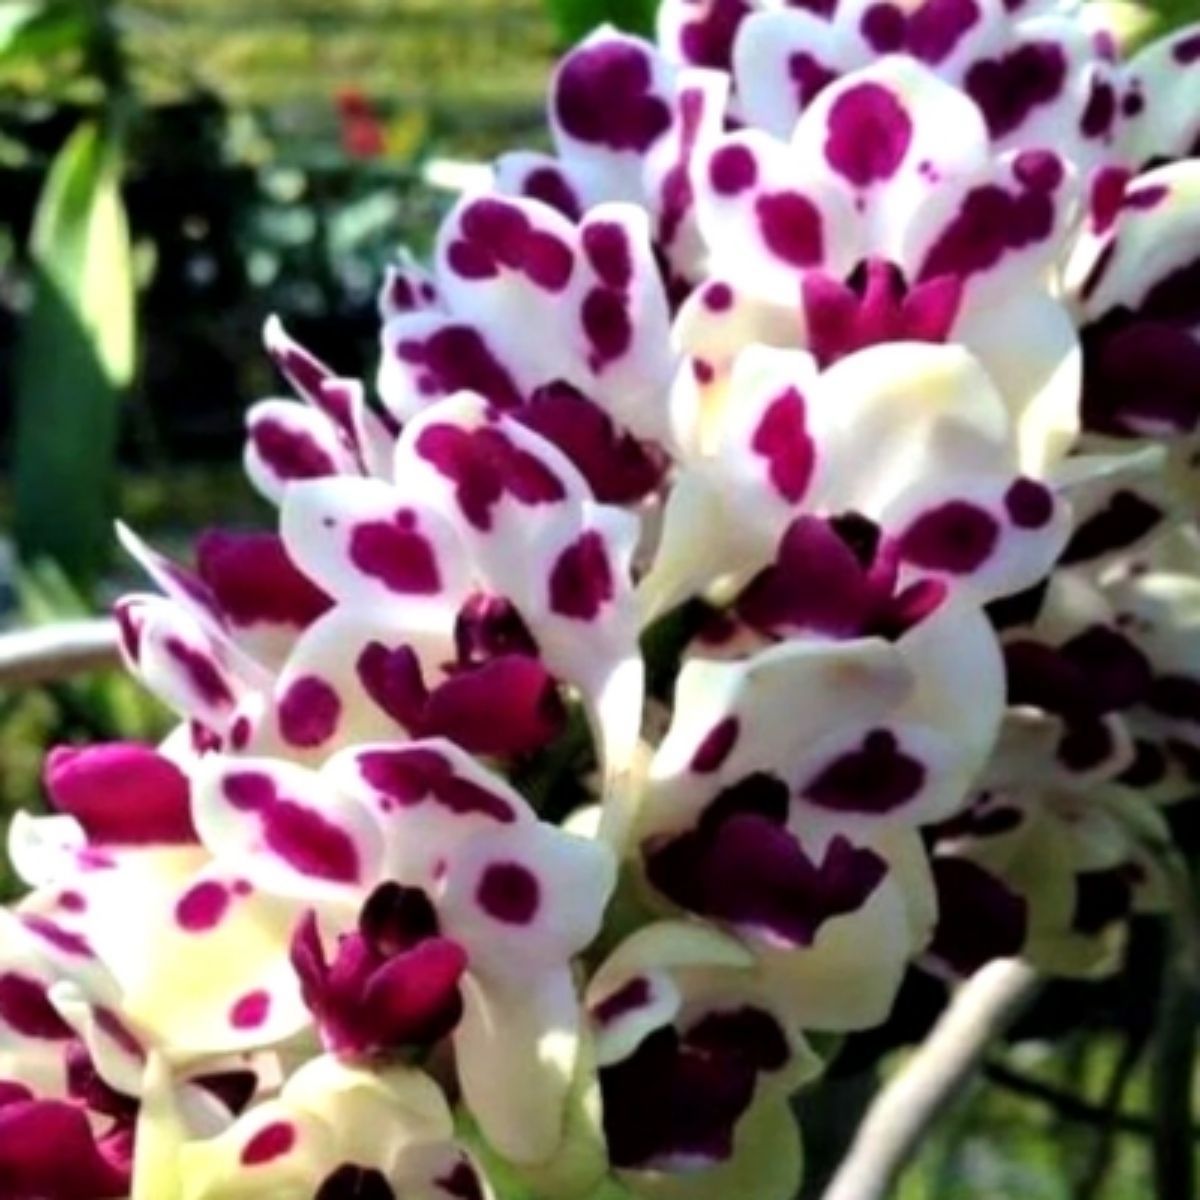 Whimsical Rhynchostylis Gigantea Cartoon Orchid with colorful and uniquely shaped flowers, resembling a charming cartoon character, adding a playful touch to any space